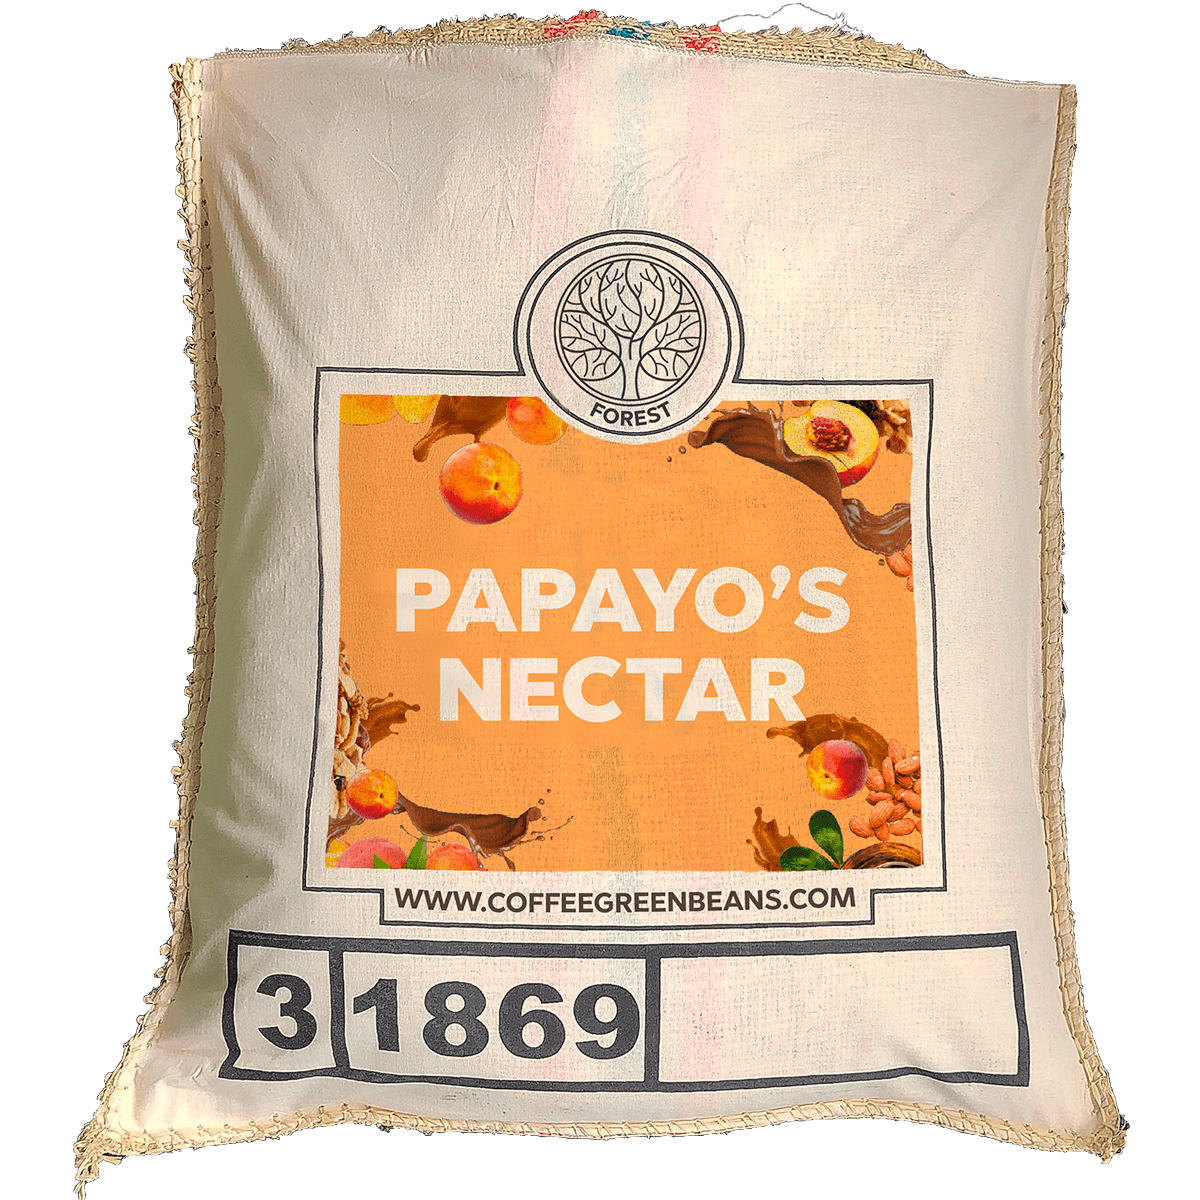 PAPAYO'S NECTAR - Forest Coffee 